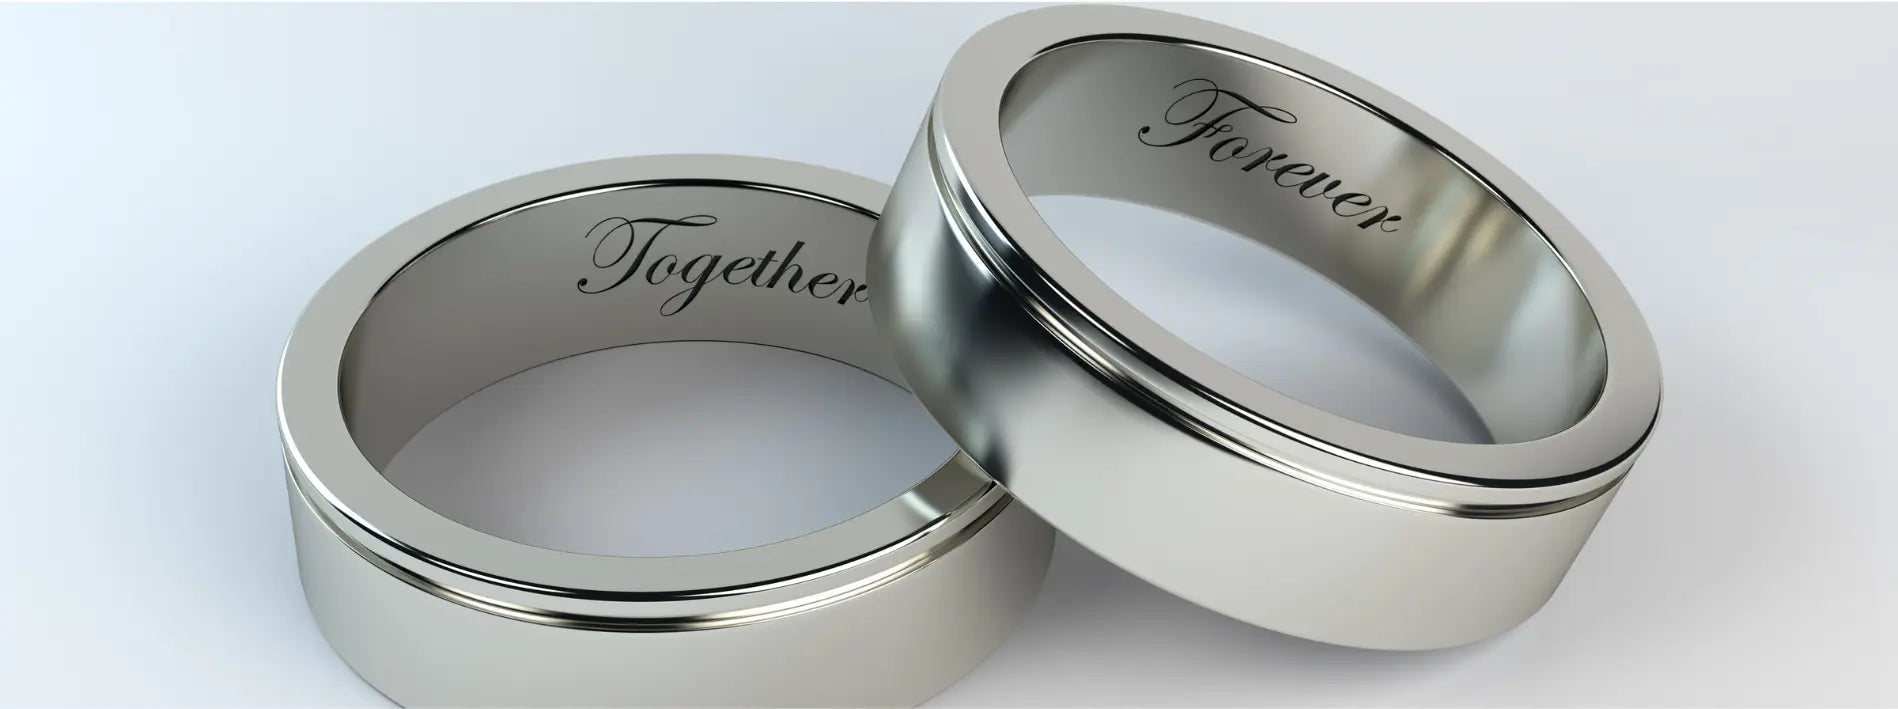 Custom silver rings with name engraving